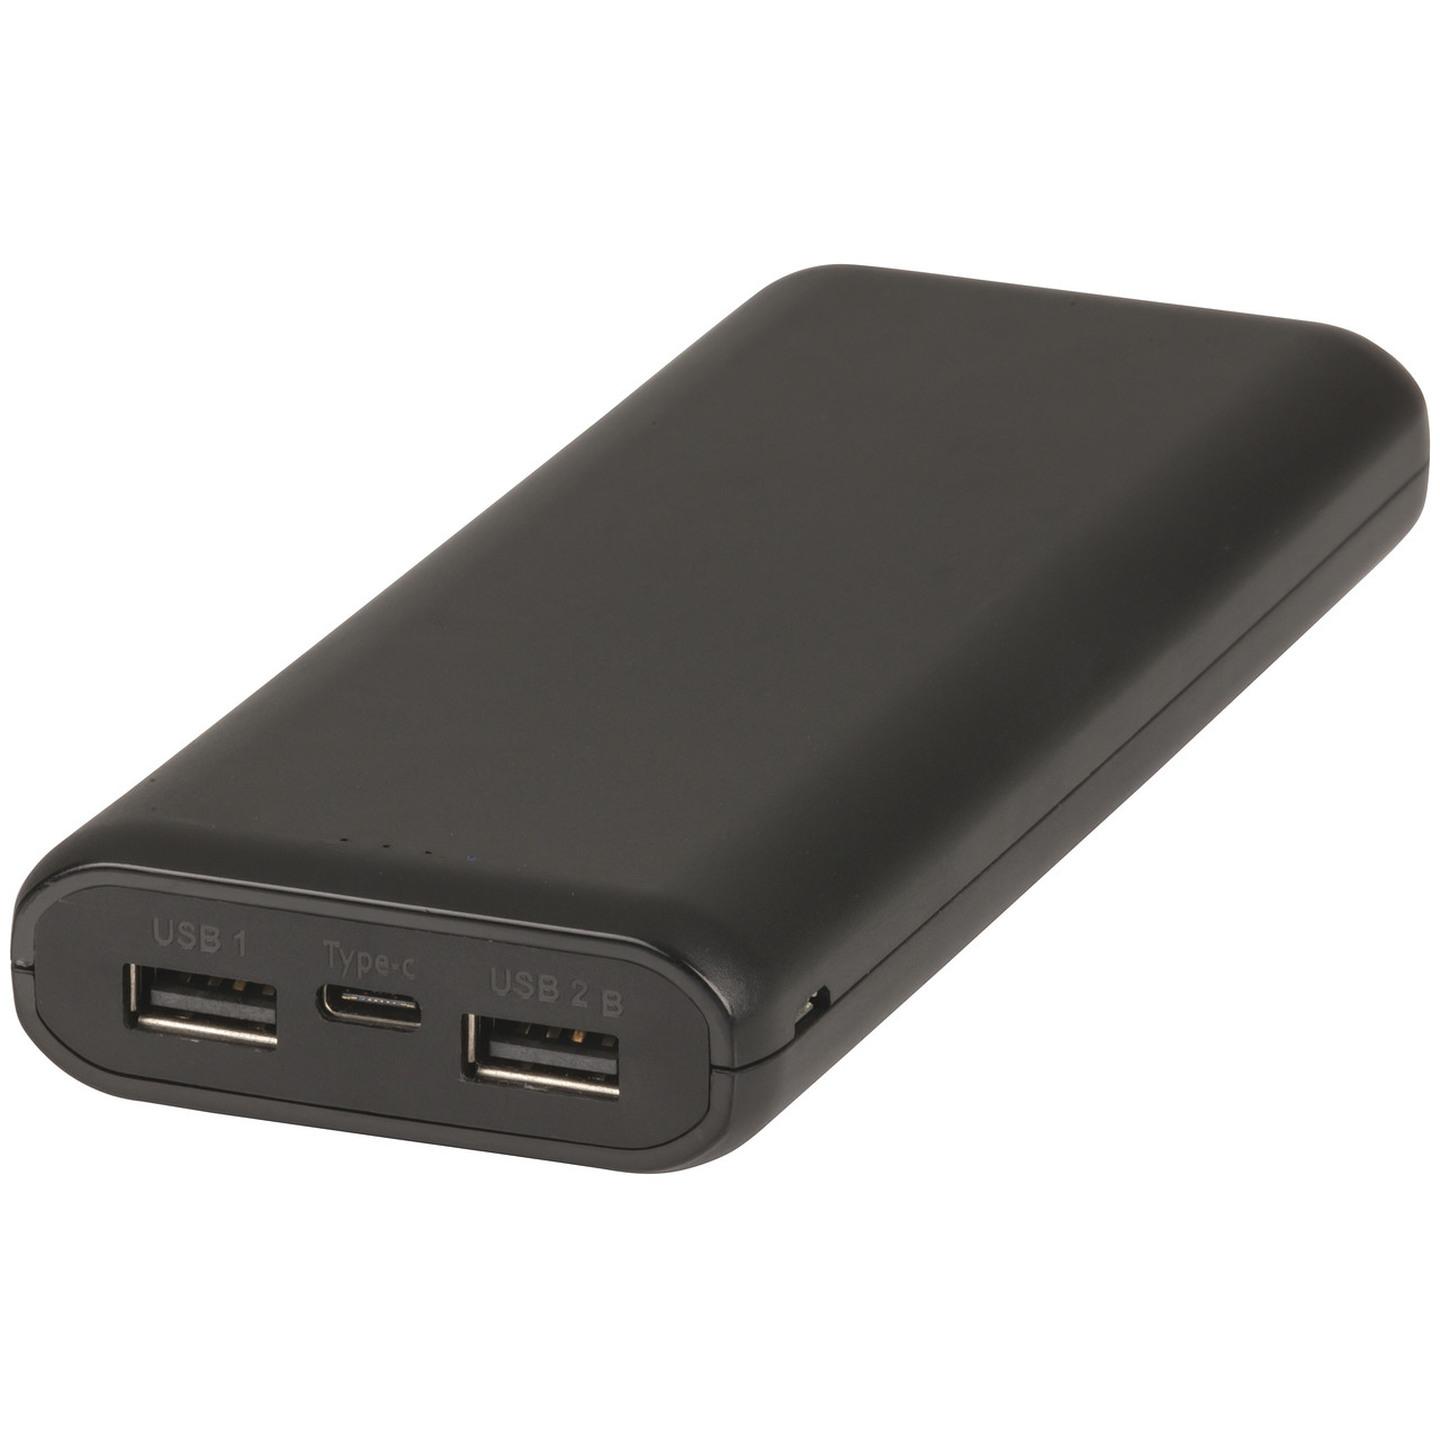 Powertech 15600mAh Portable Power Bank with USB Type-C and Dual USB-A Ports